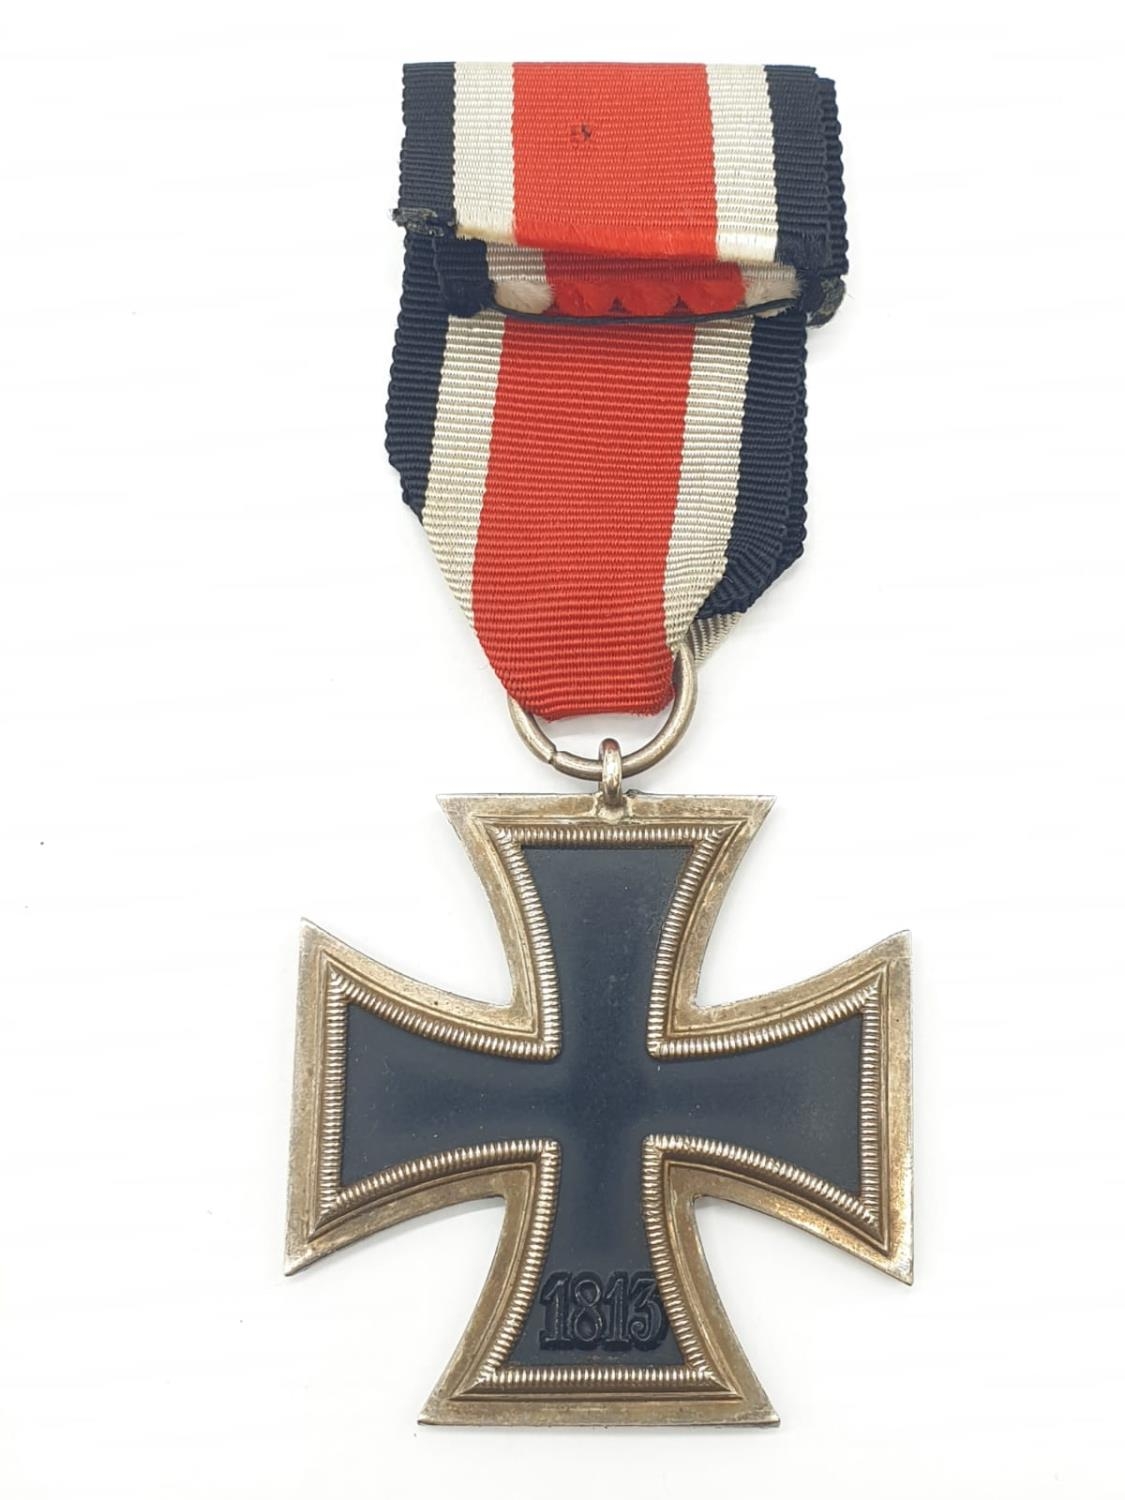 WW2 German Iron Cross 2nd Class. No makers marks but a typical Steinhaur & Luck example none the